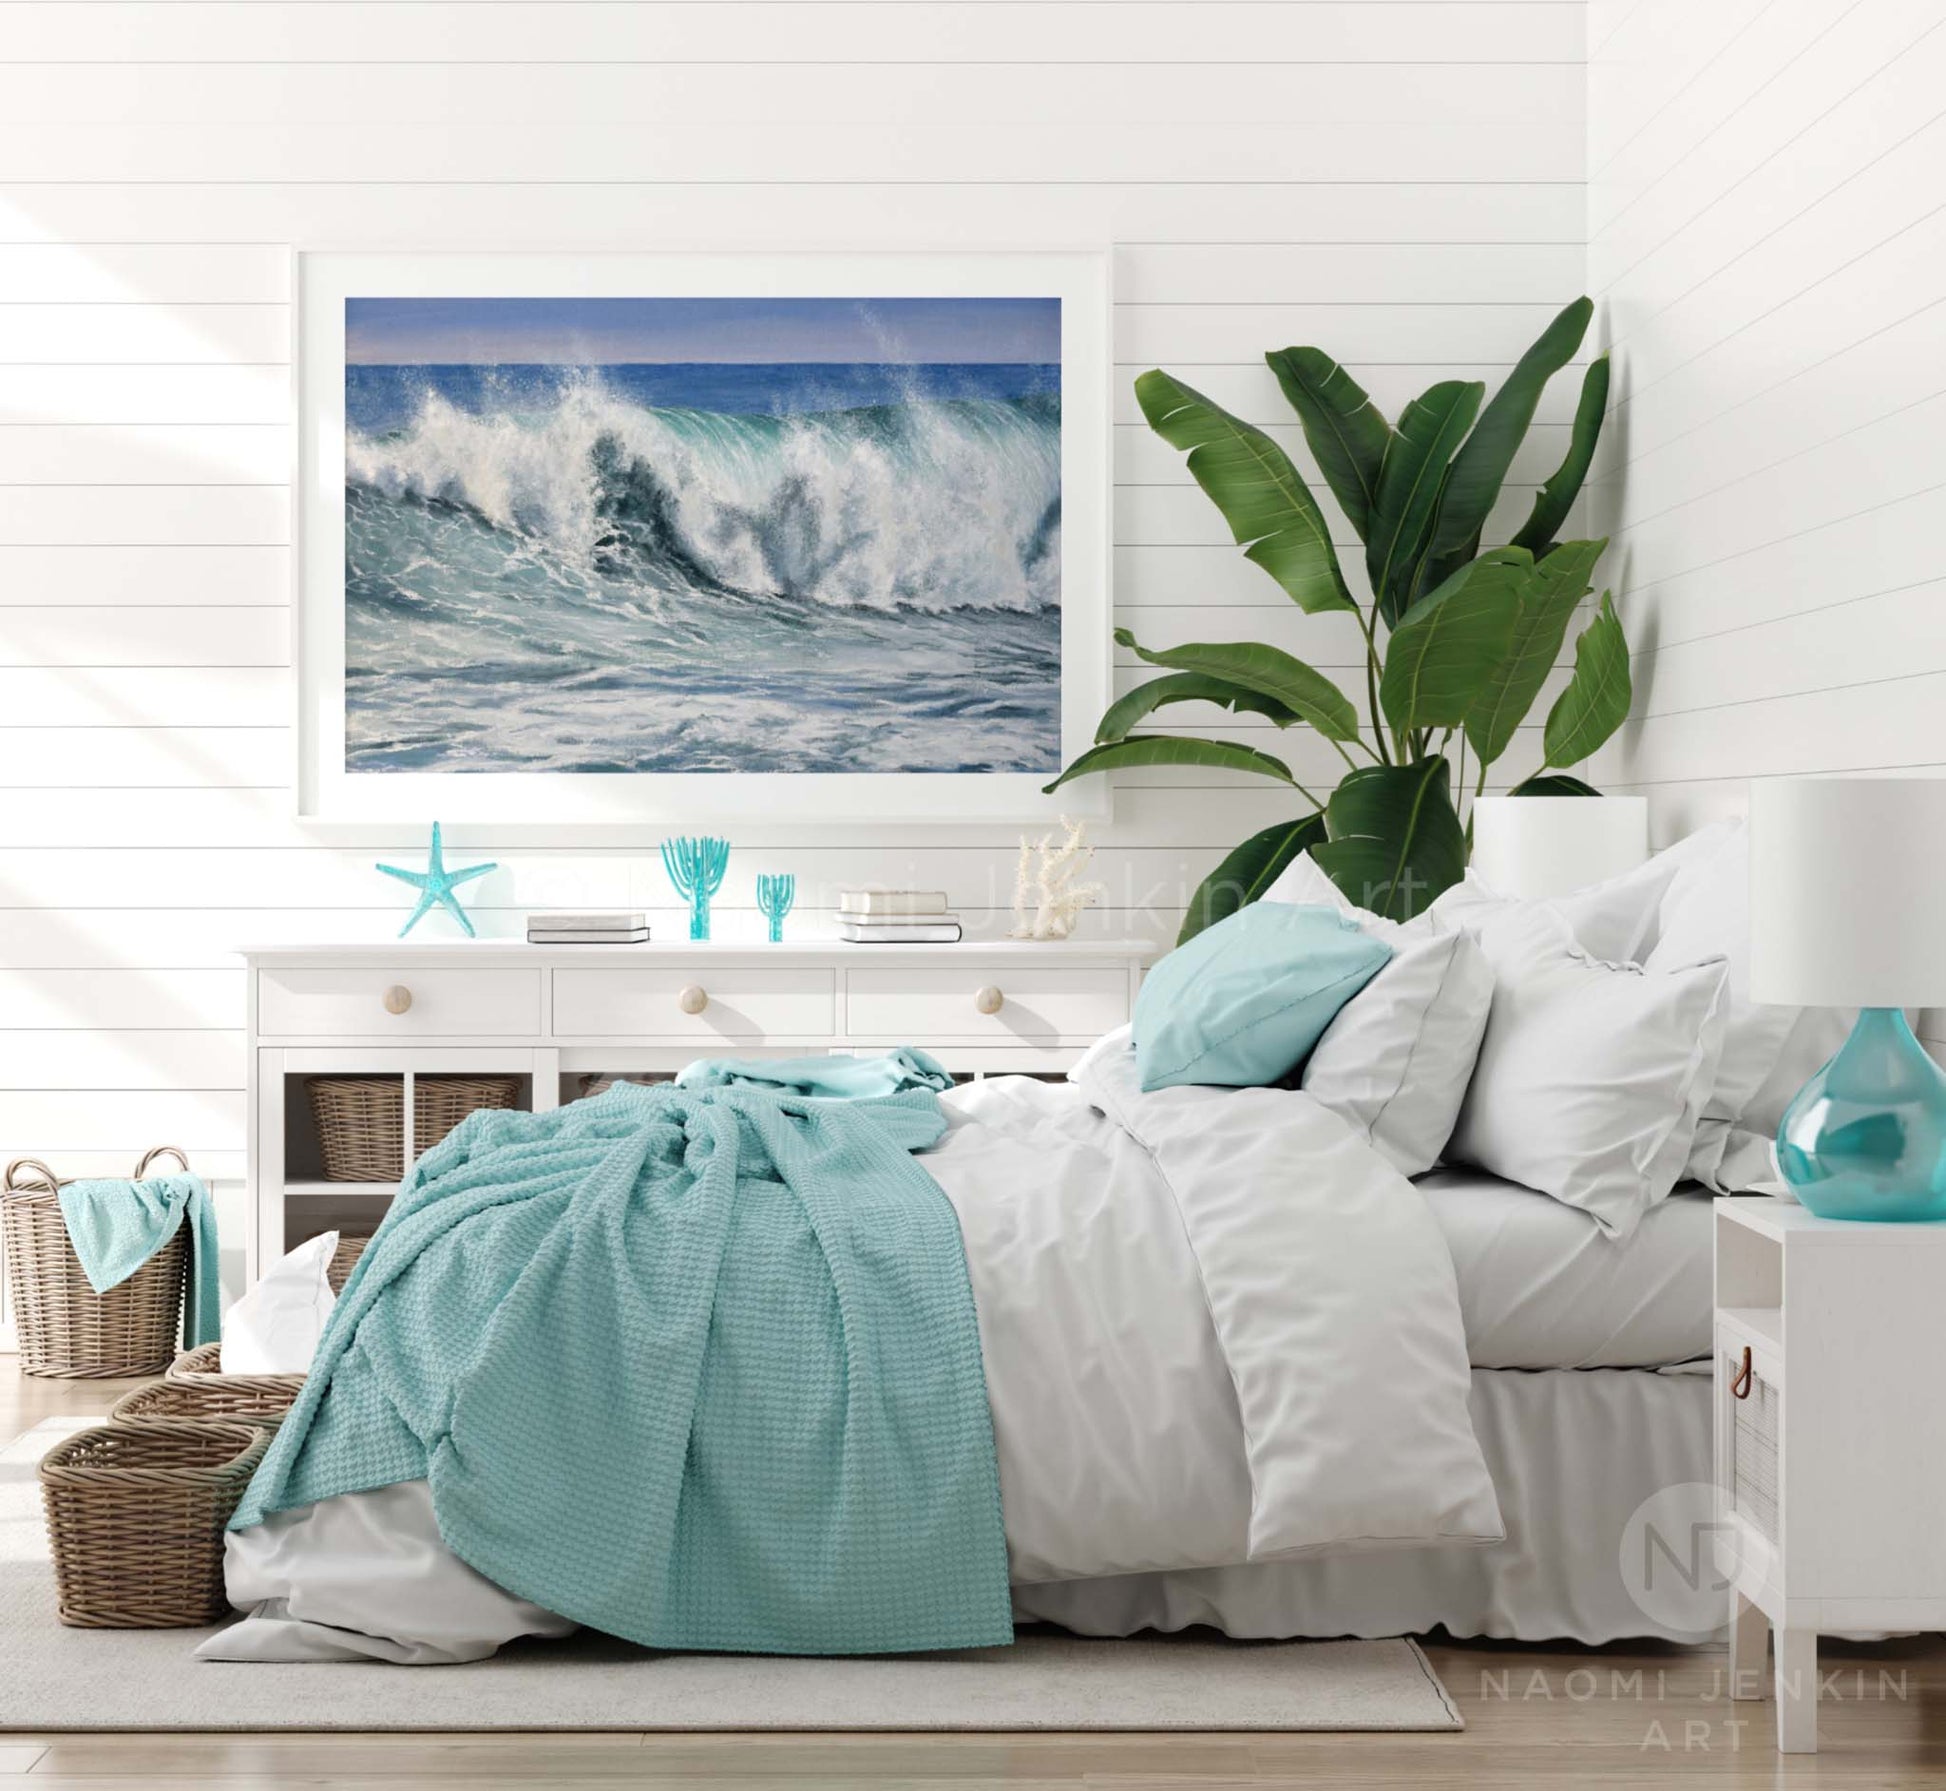 Seascape print 'Offshore Spray' by Naomi Jenkin Art in a white frame and bedroom setting. 